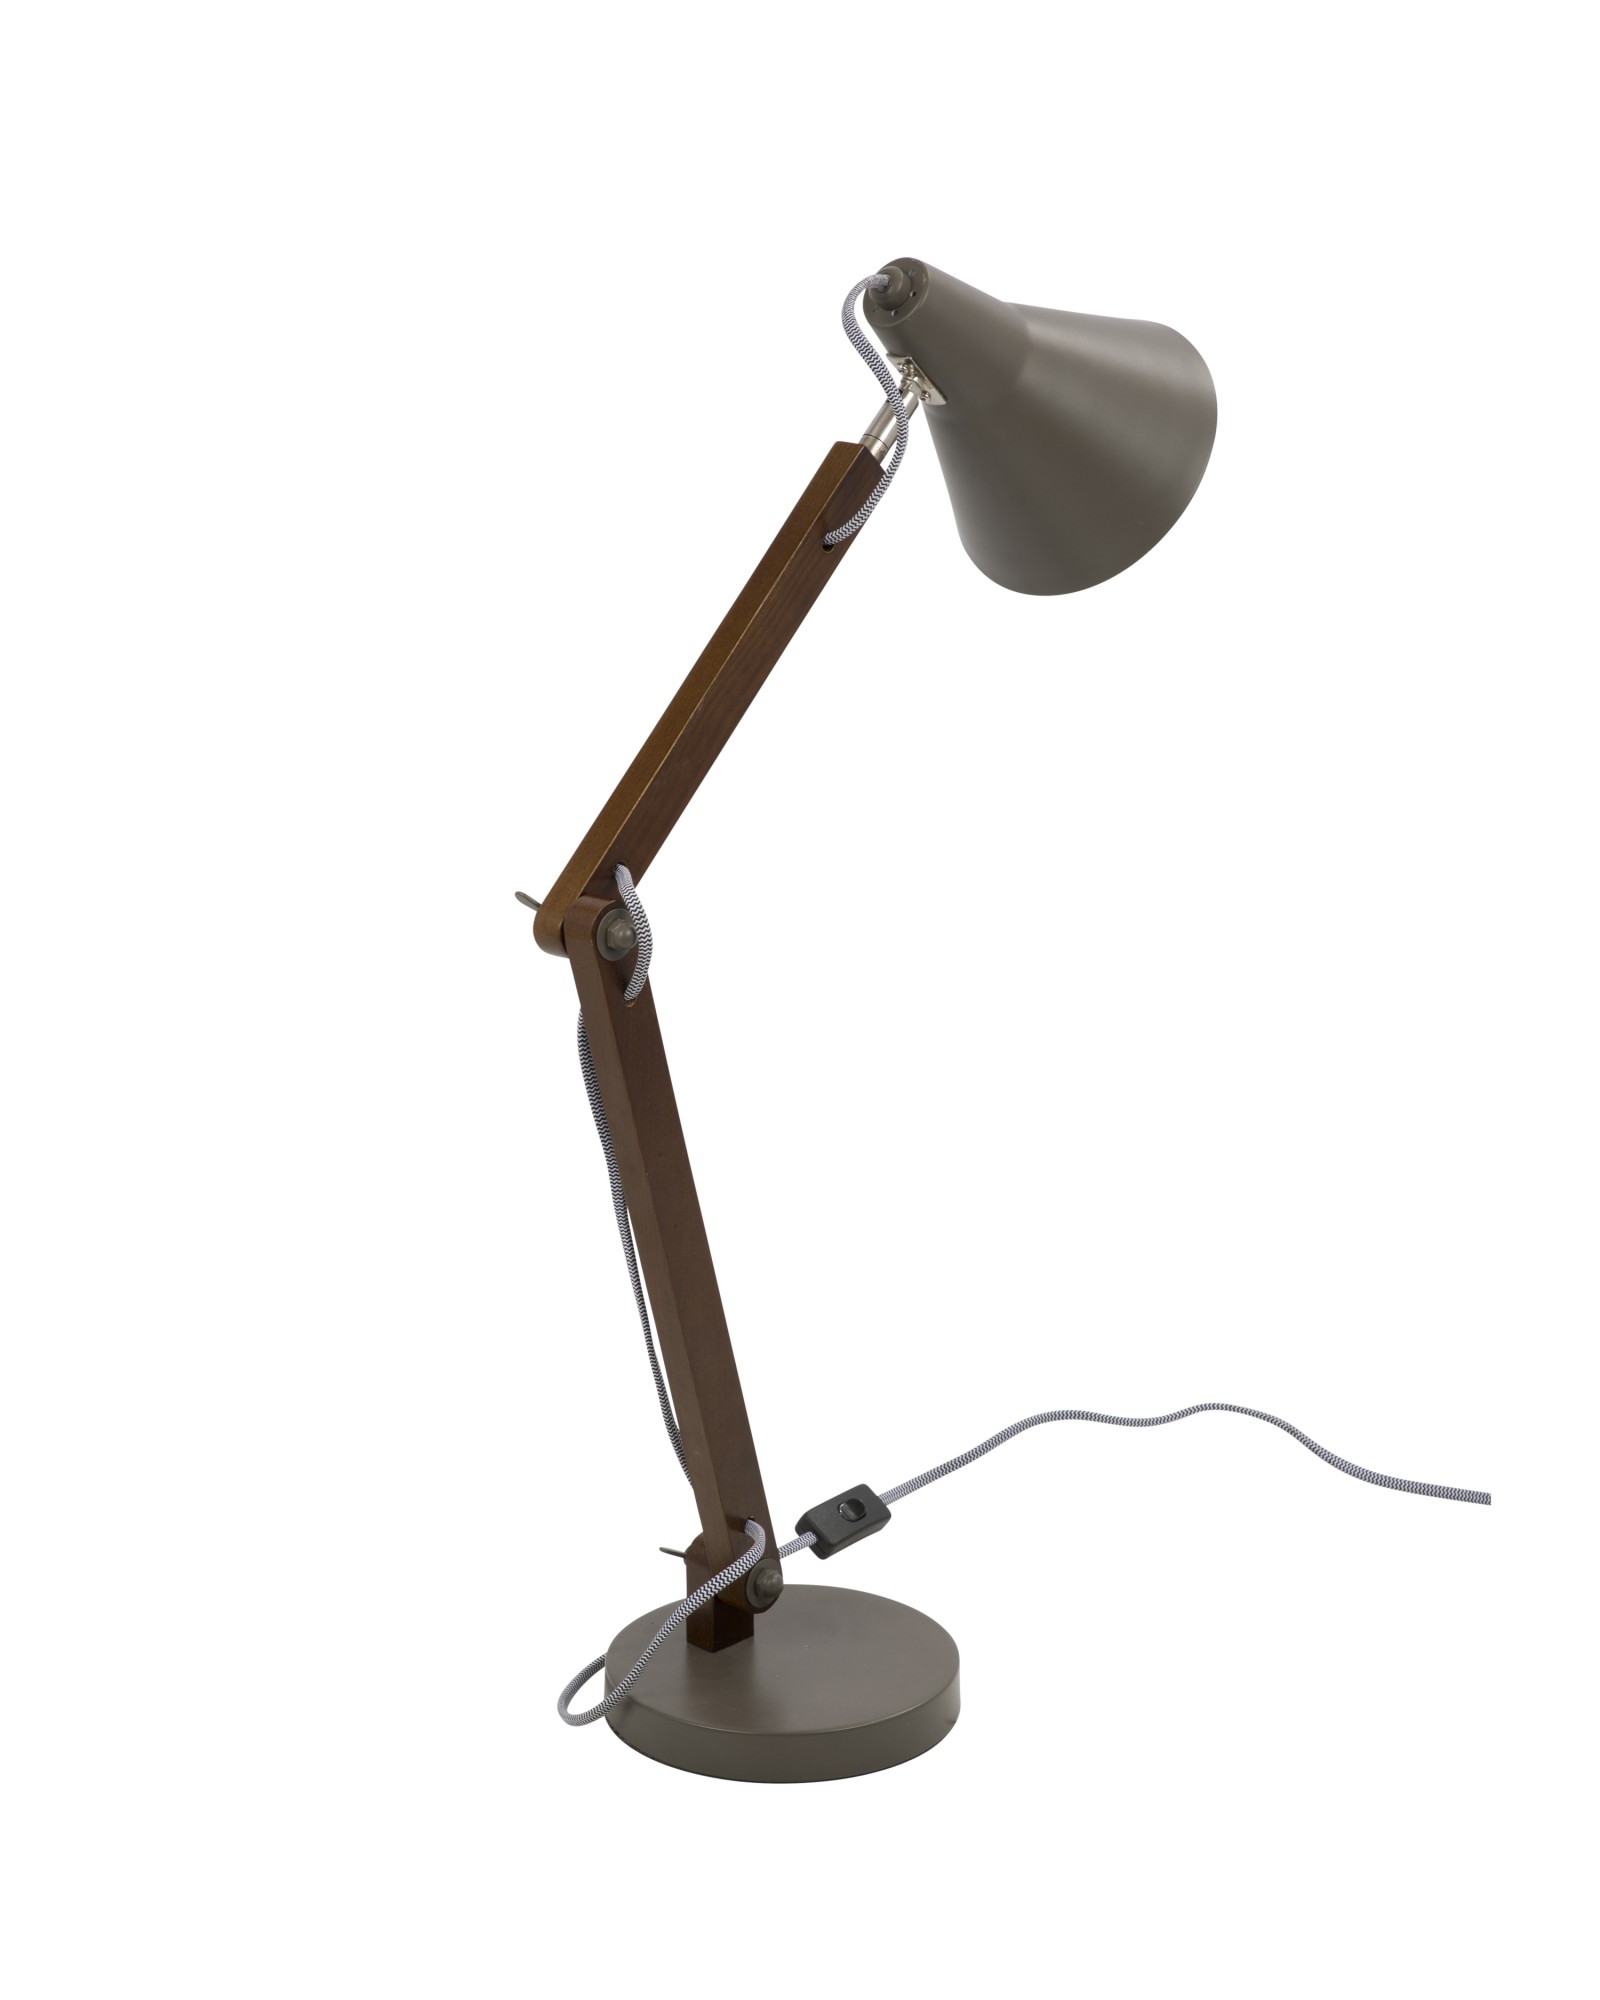 Oregon Industrial Adjustable Table Lamp in Walnut and Grey